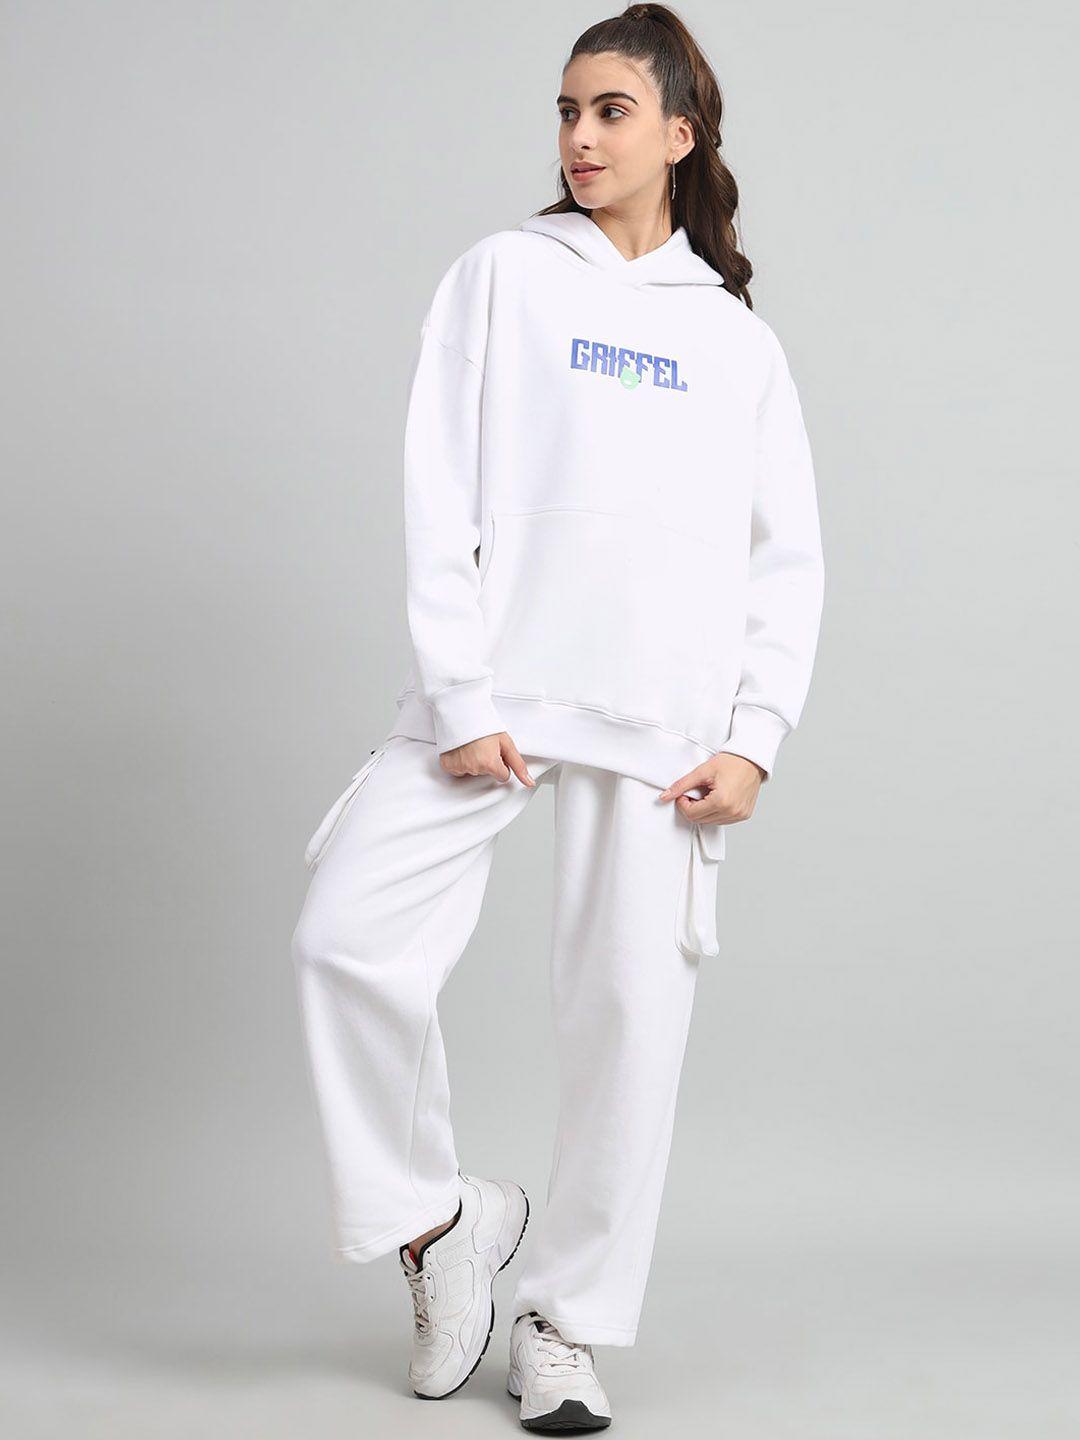 griffel brand logo printed hooded fleece tracksuits